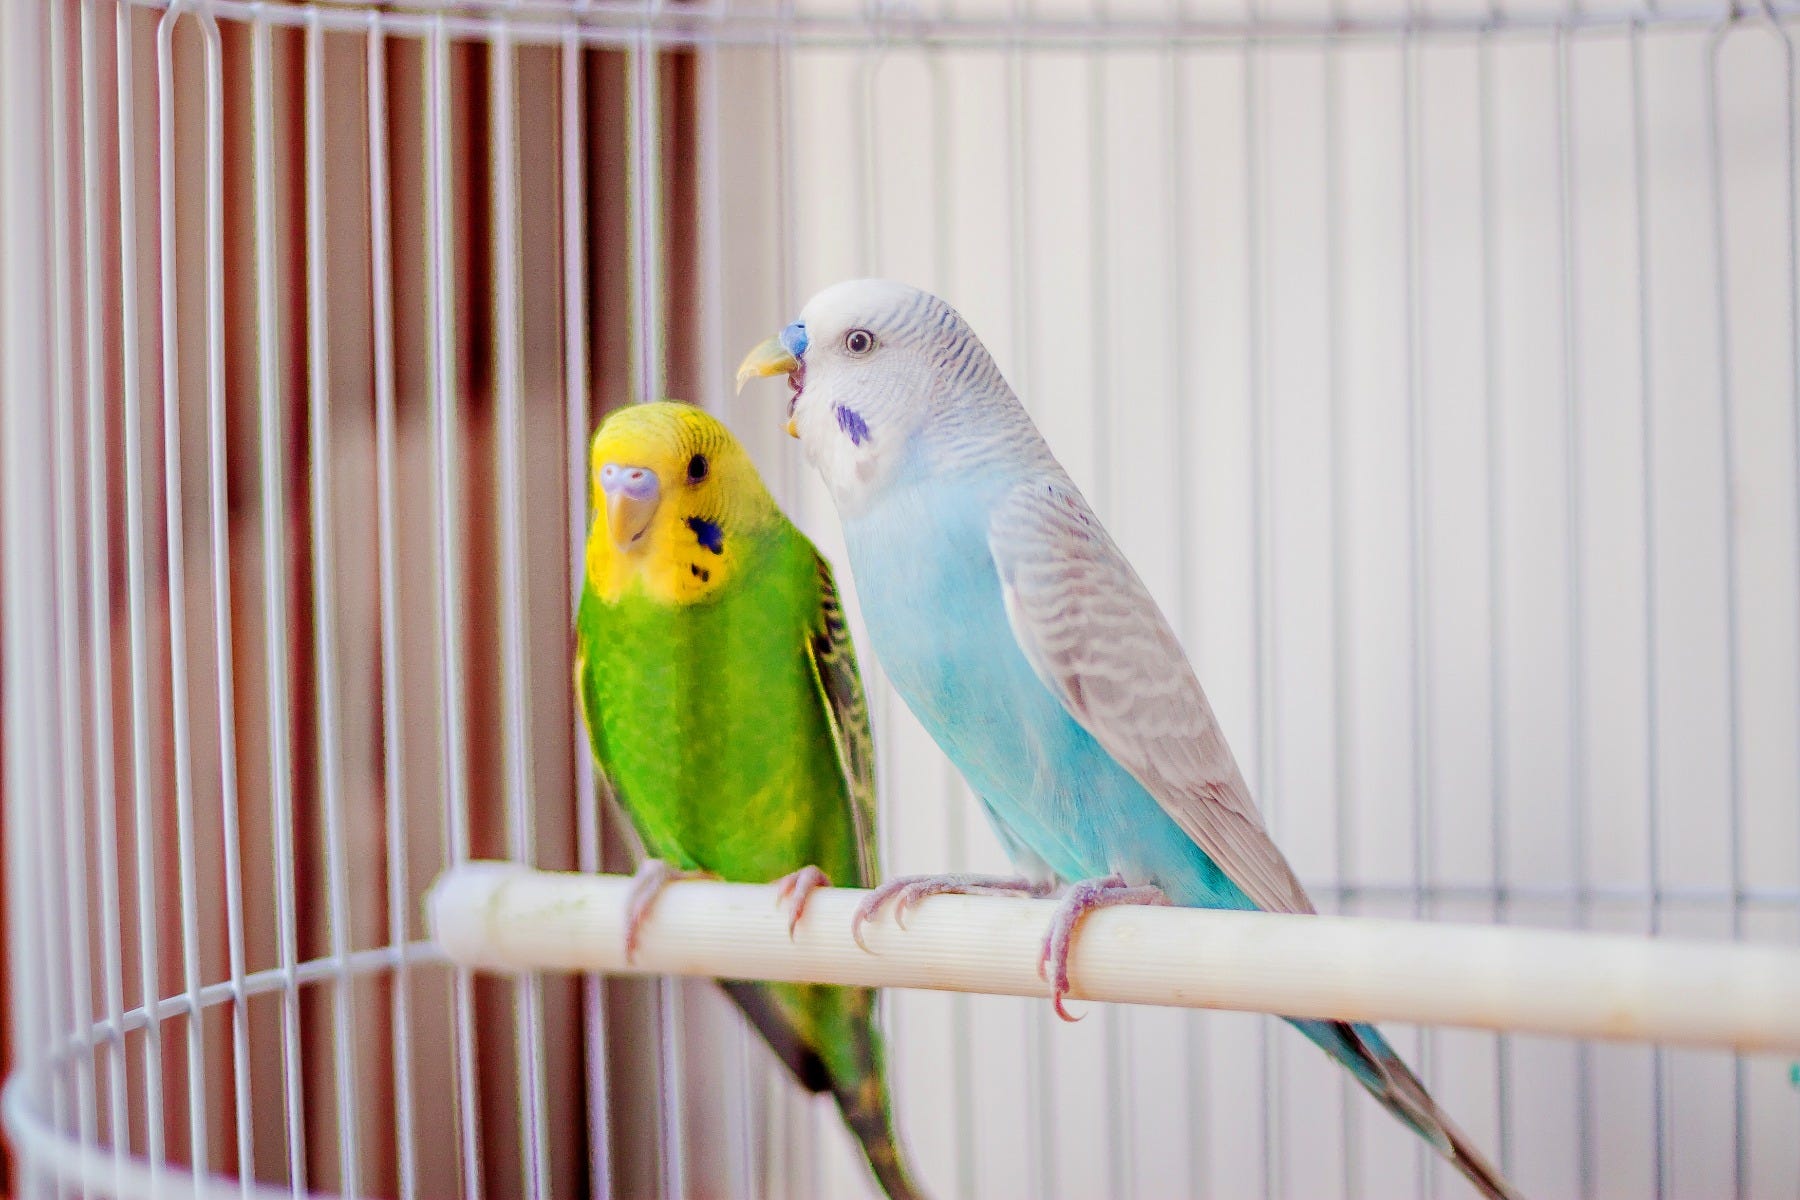 Two pet birds in their bird cage